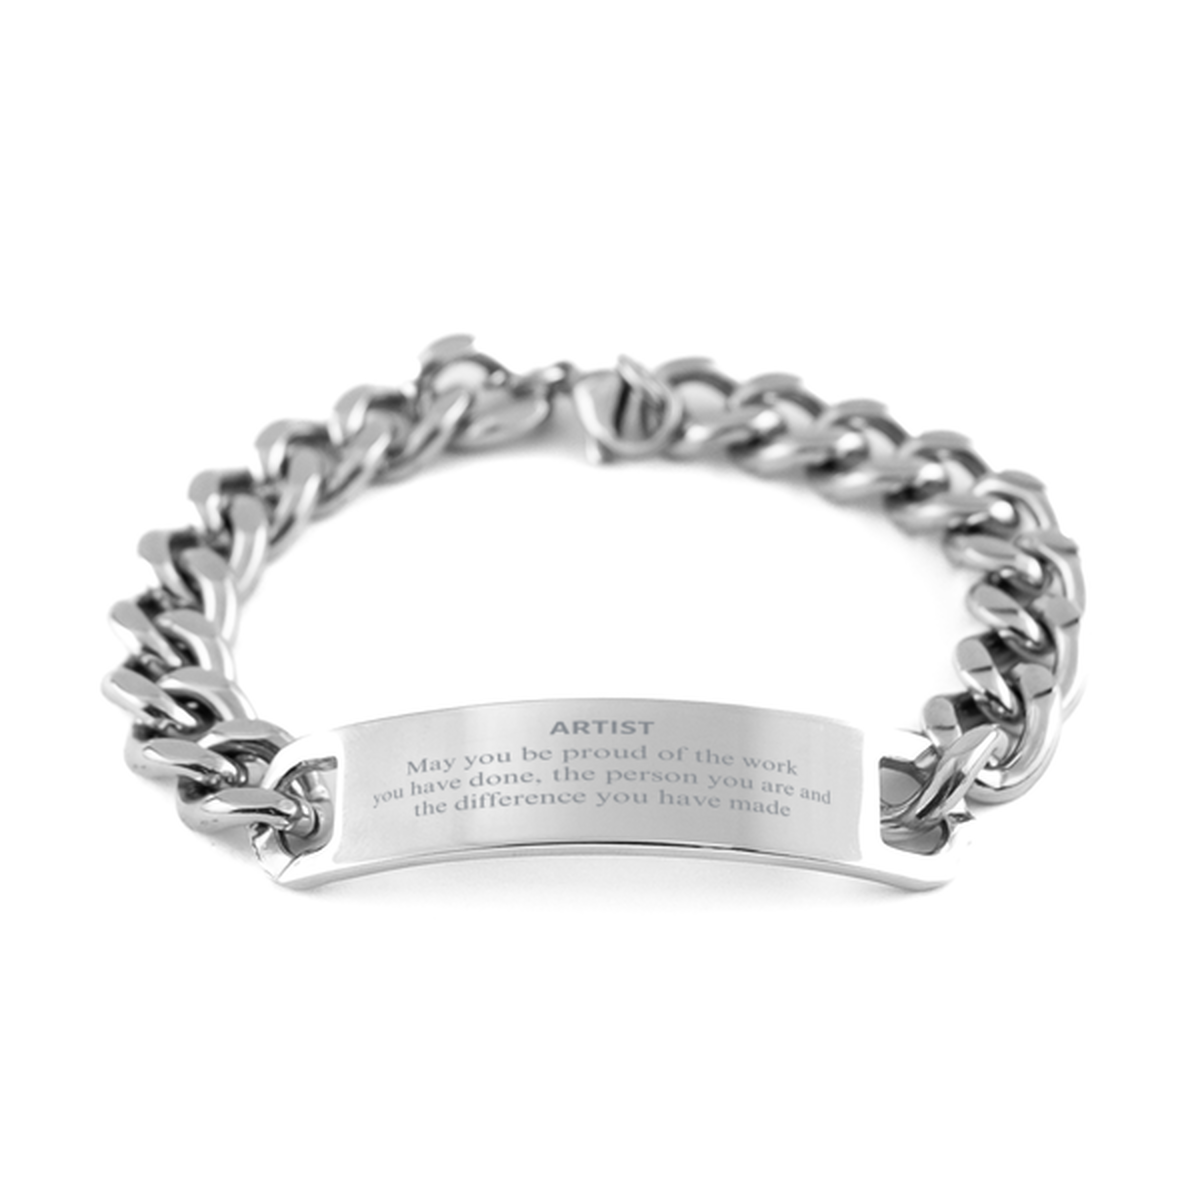 Artist May you be proud of the work you have done, Retirement Artist Cuban Chain Stainless Steel Bracelet for Colleague Appreciation Gifts Amazing for Artist